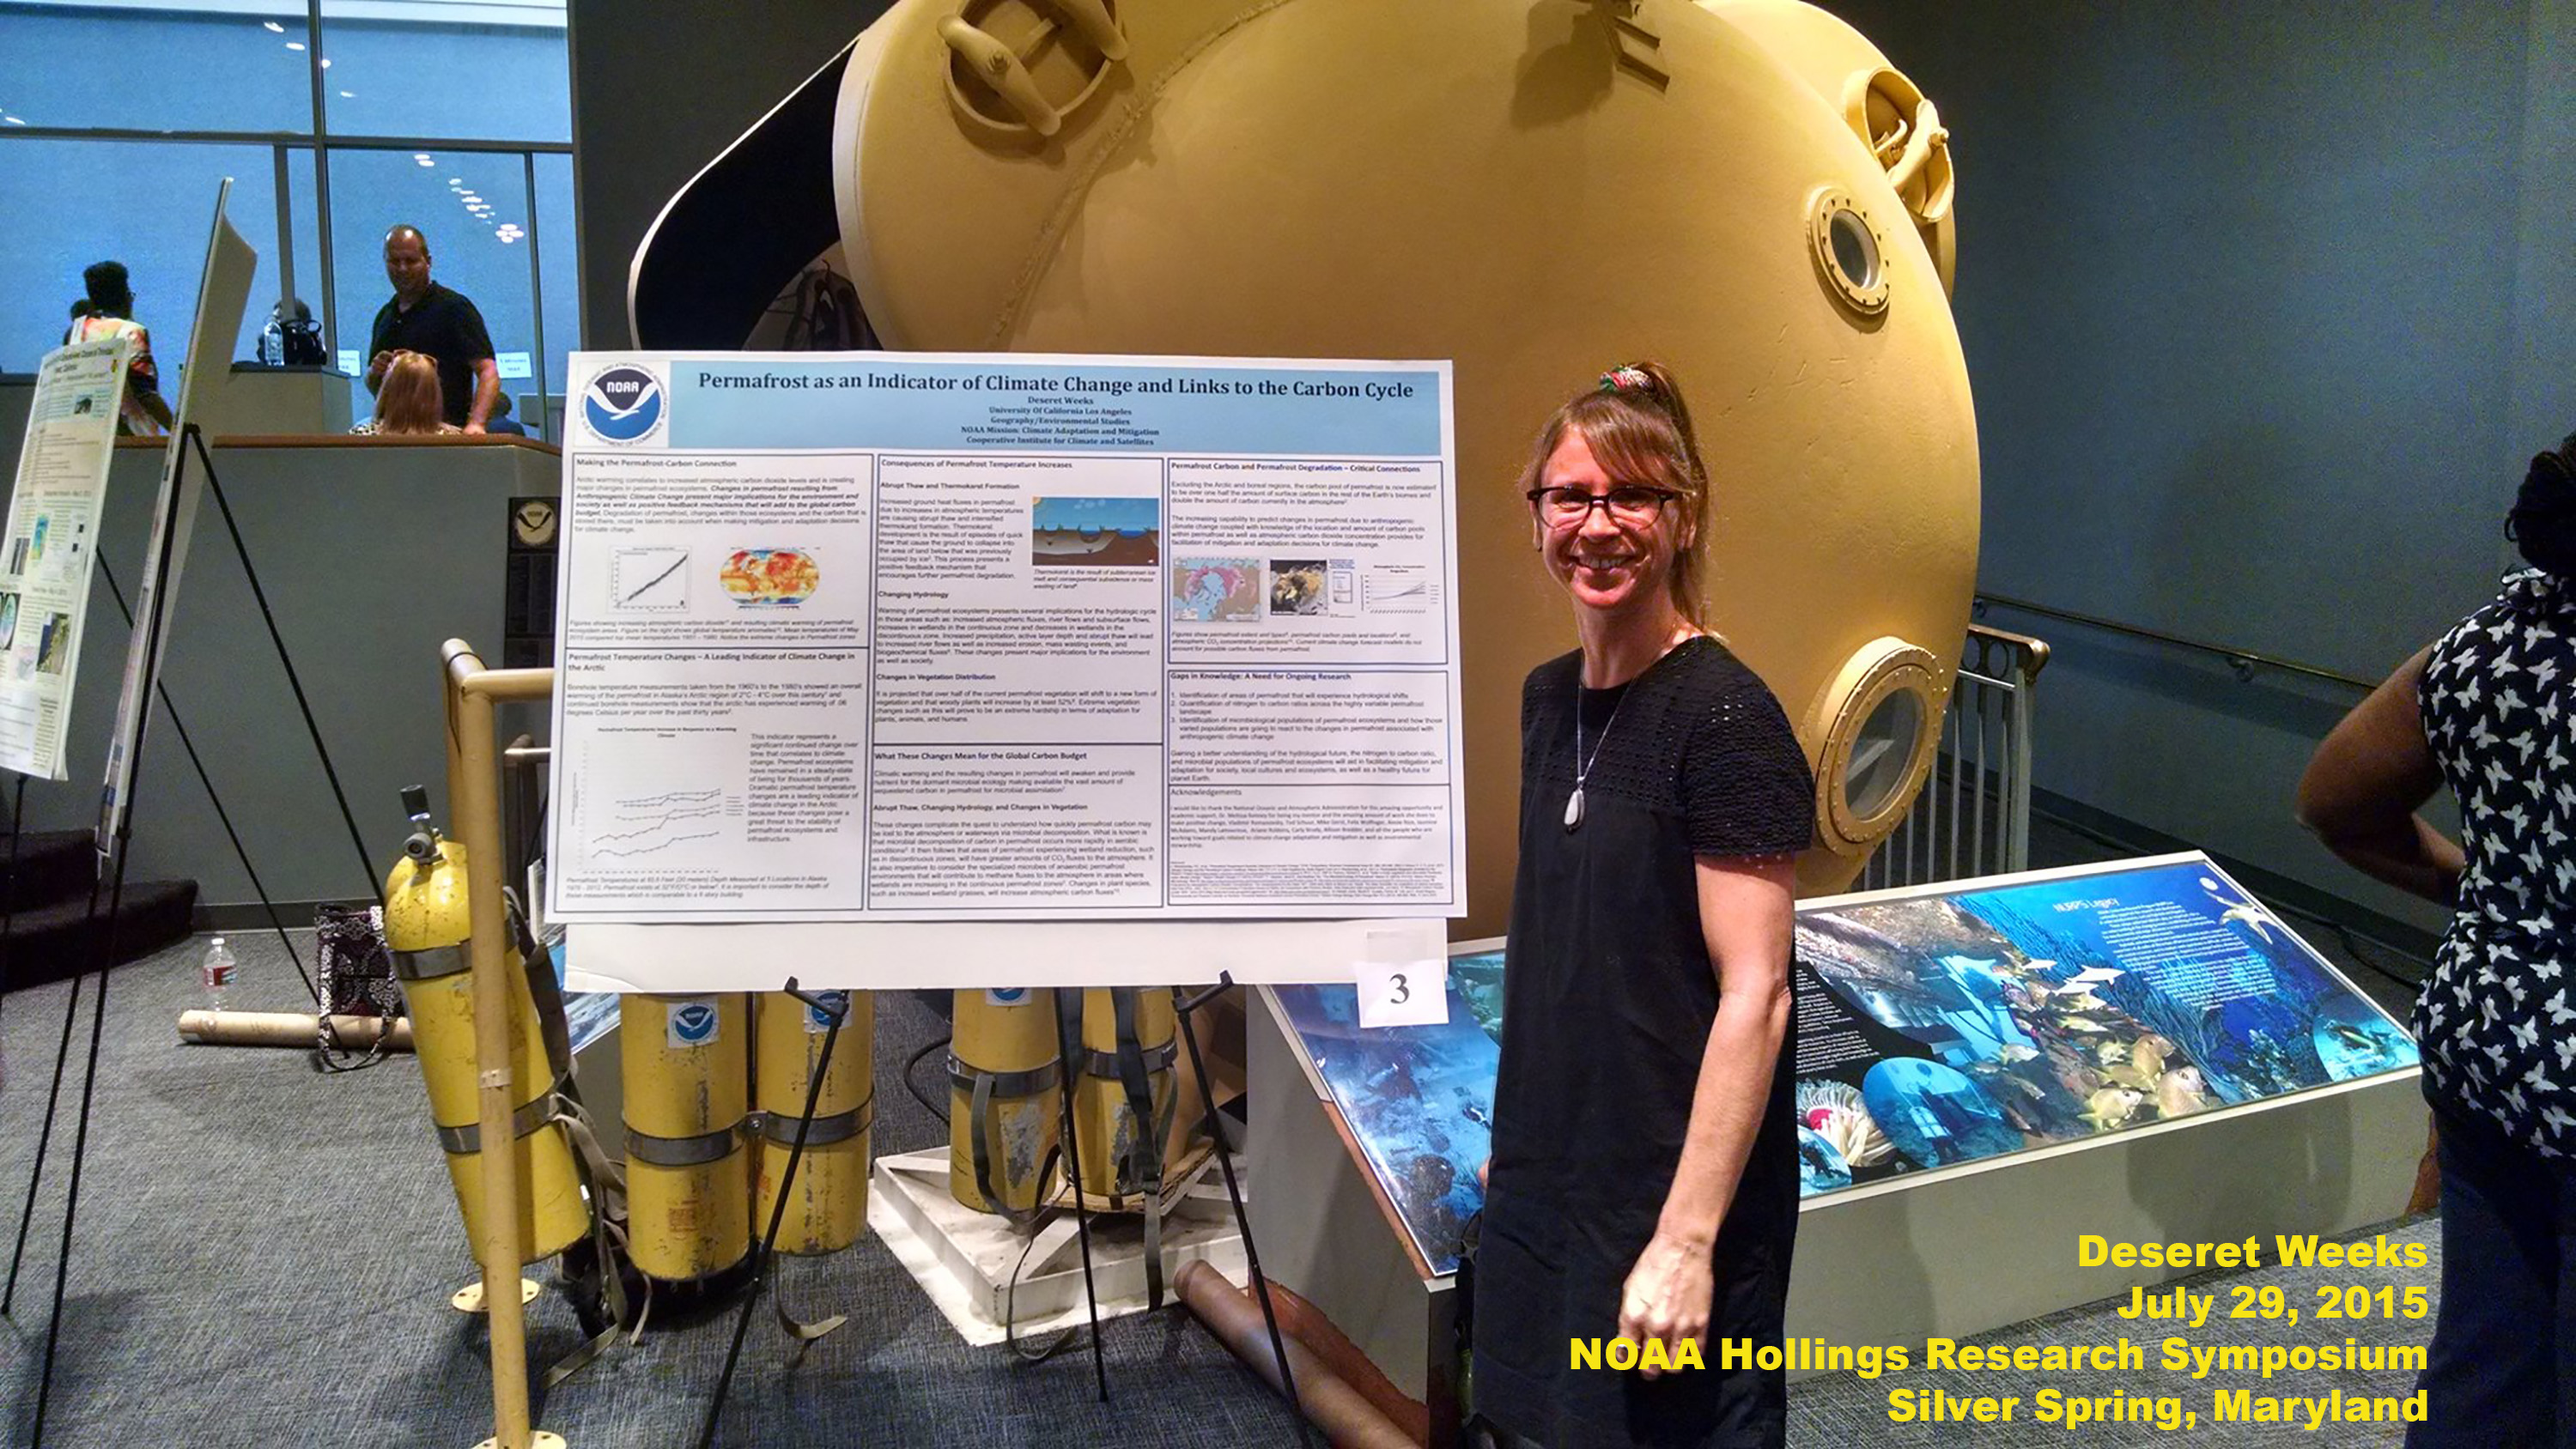 Deseret Weeks, a NOAA Hollings Scholarship alum from the class of 2014, worked with Dr. Melissa Kenney from the University of Maryland to develop indicators of climate change for the National Indicators System during her summer internship. Here she is presenting her research at the NOAA Science and Education Symposium in 2015.